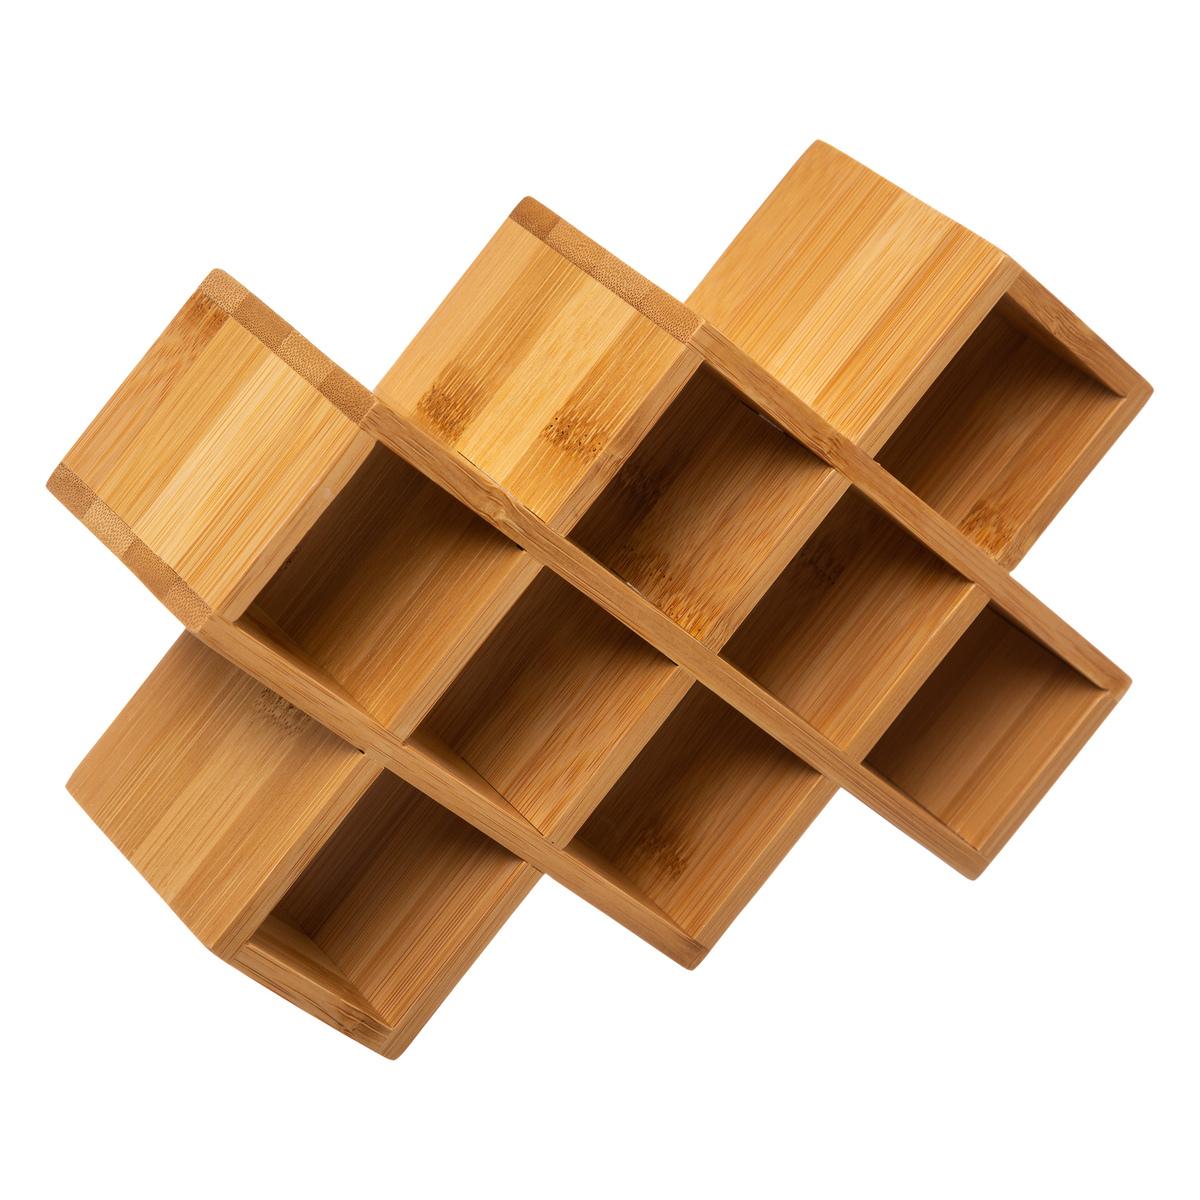 Storage for 10 bamboo spice jars - Deco, Furniture for Professionals -  Decoration Brands